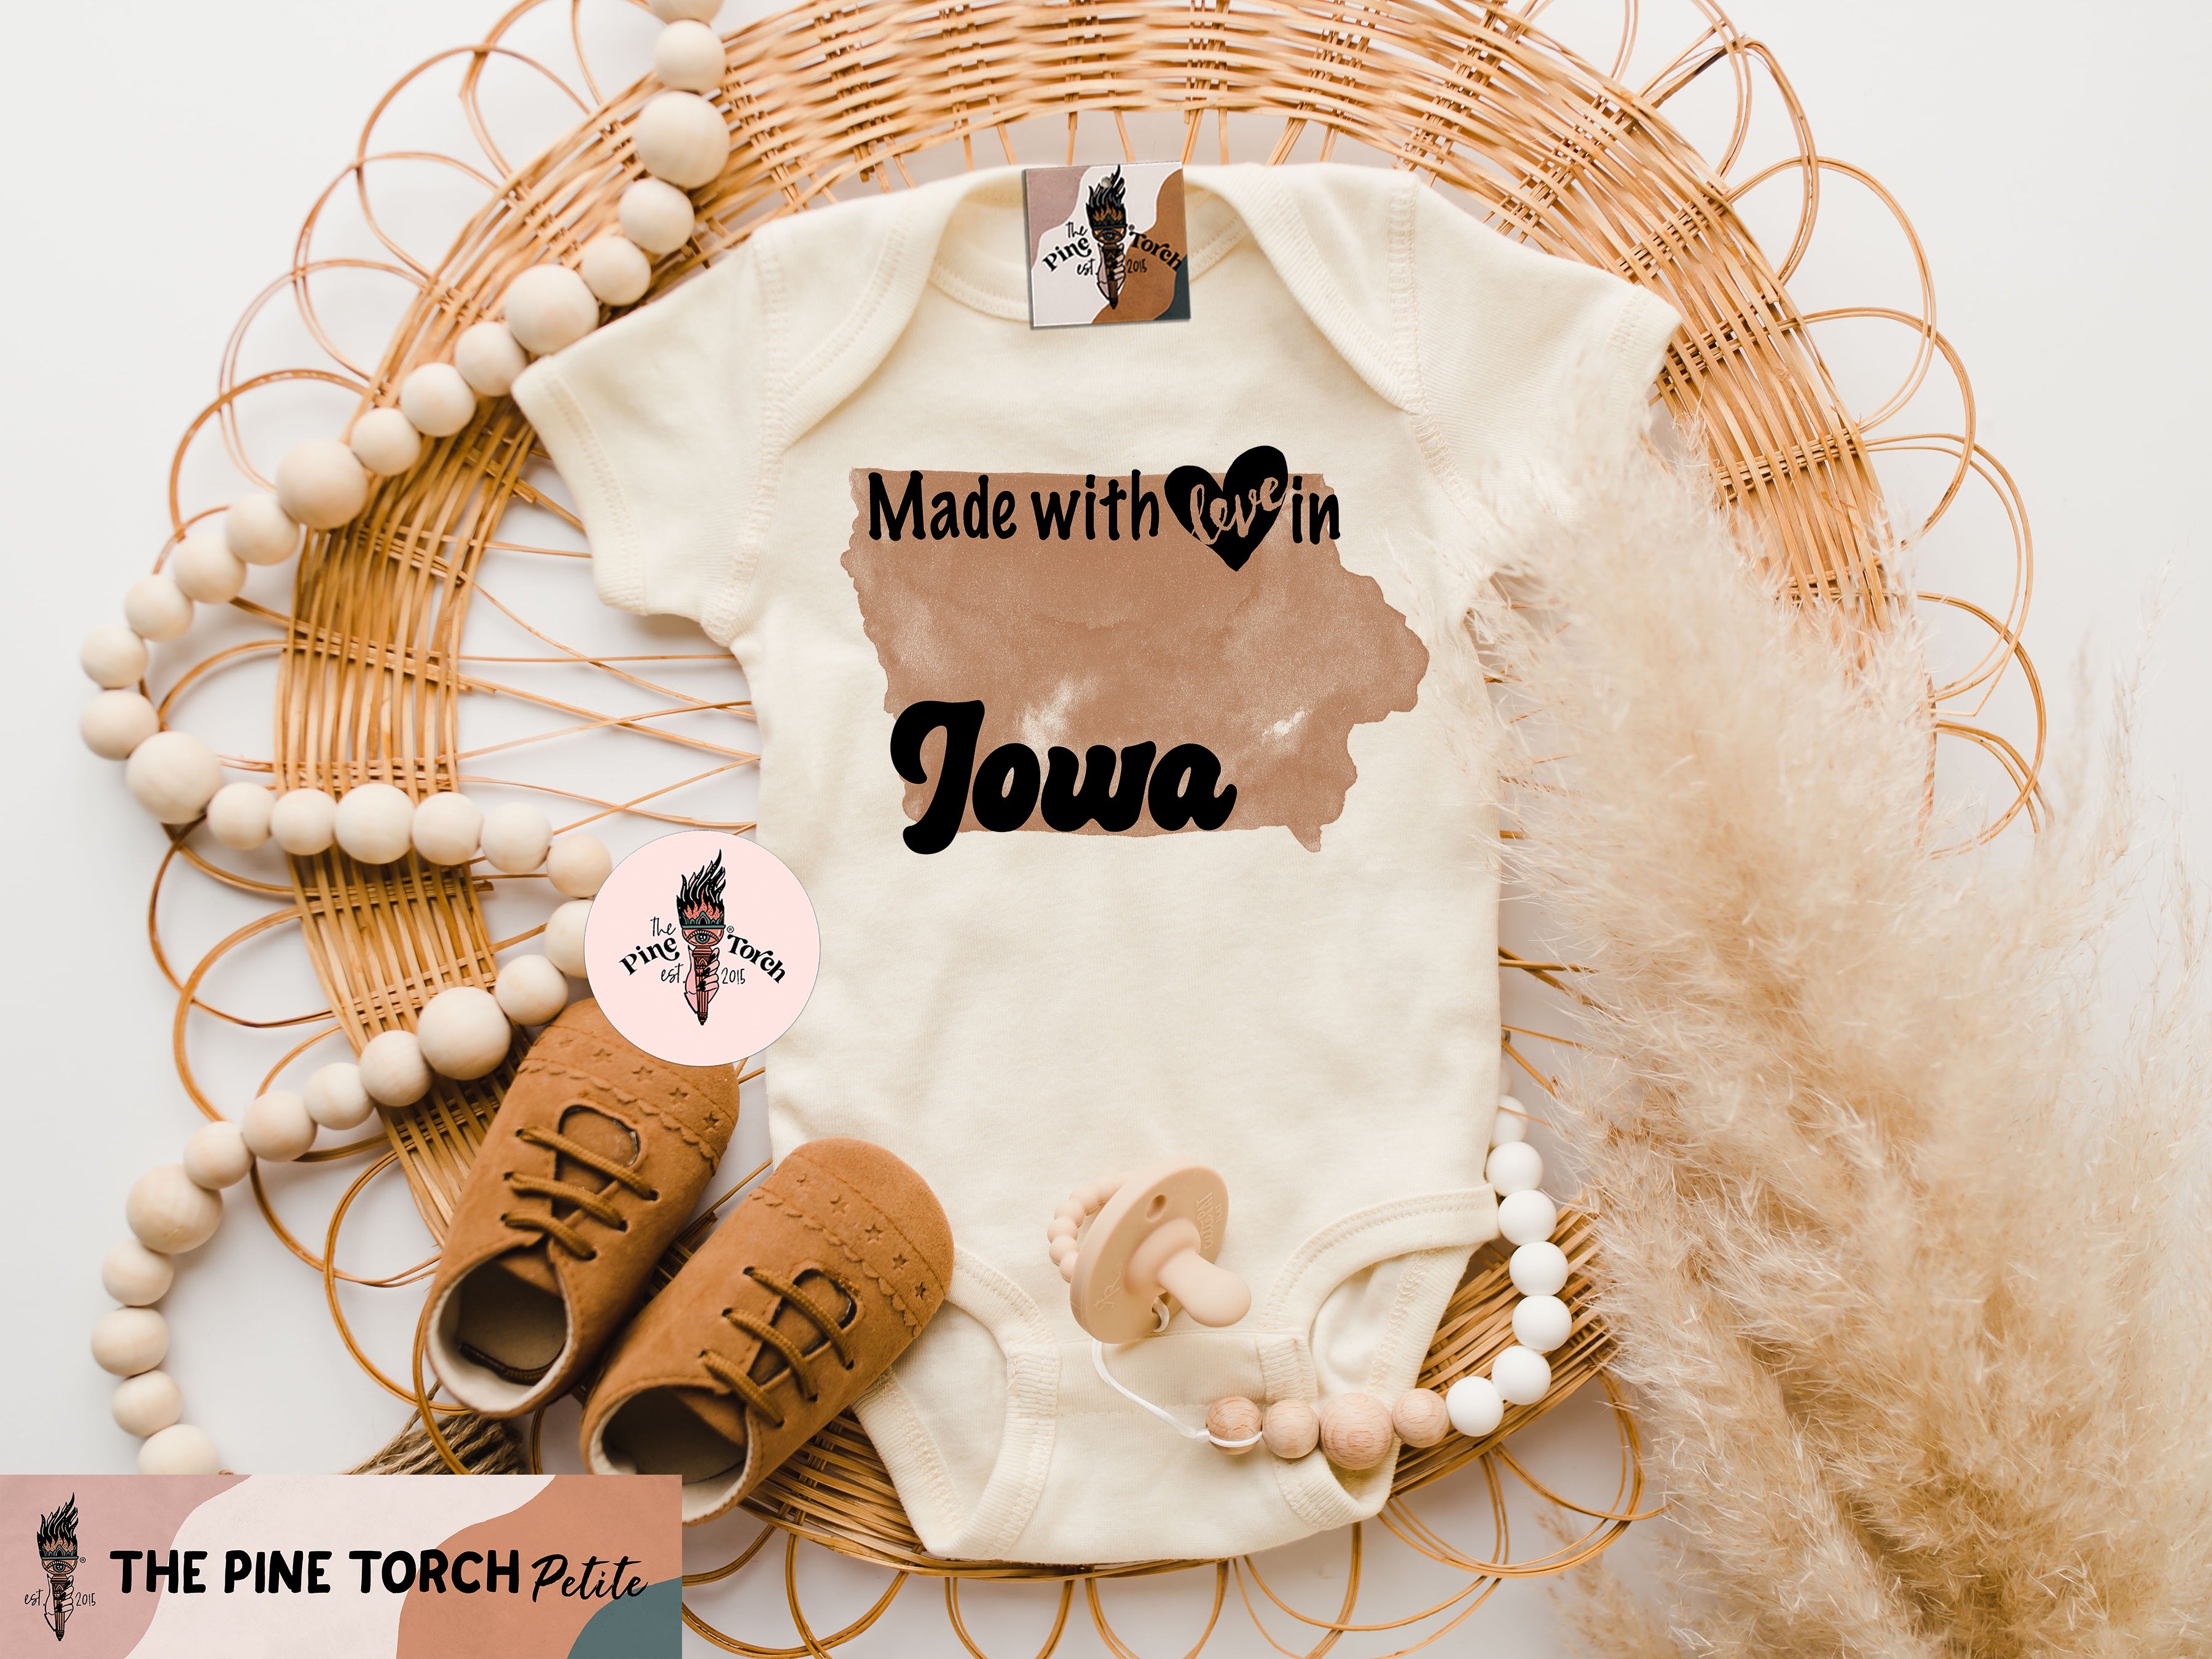 « MADE WITH LOVE IN IOWA » BODYSUIT